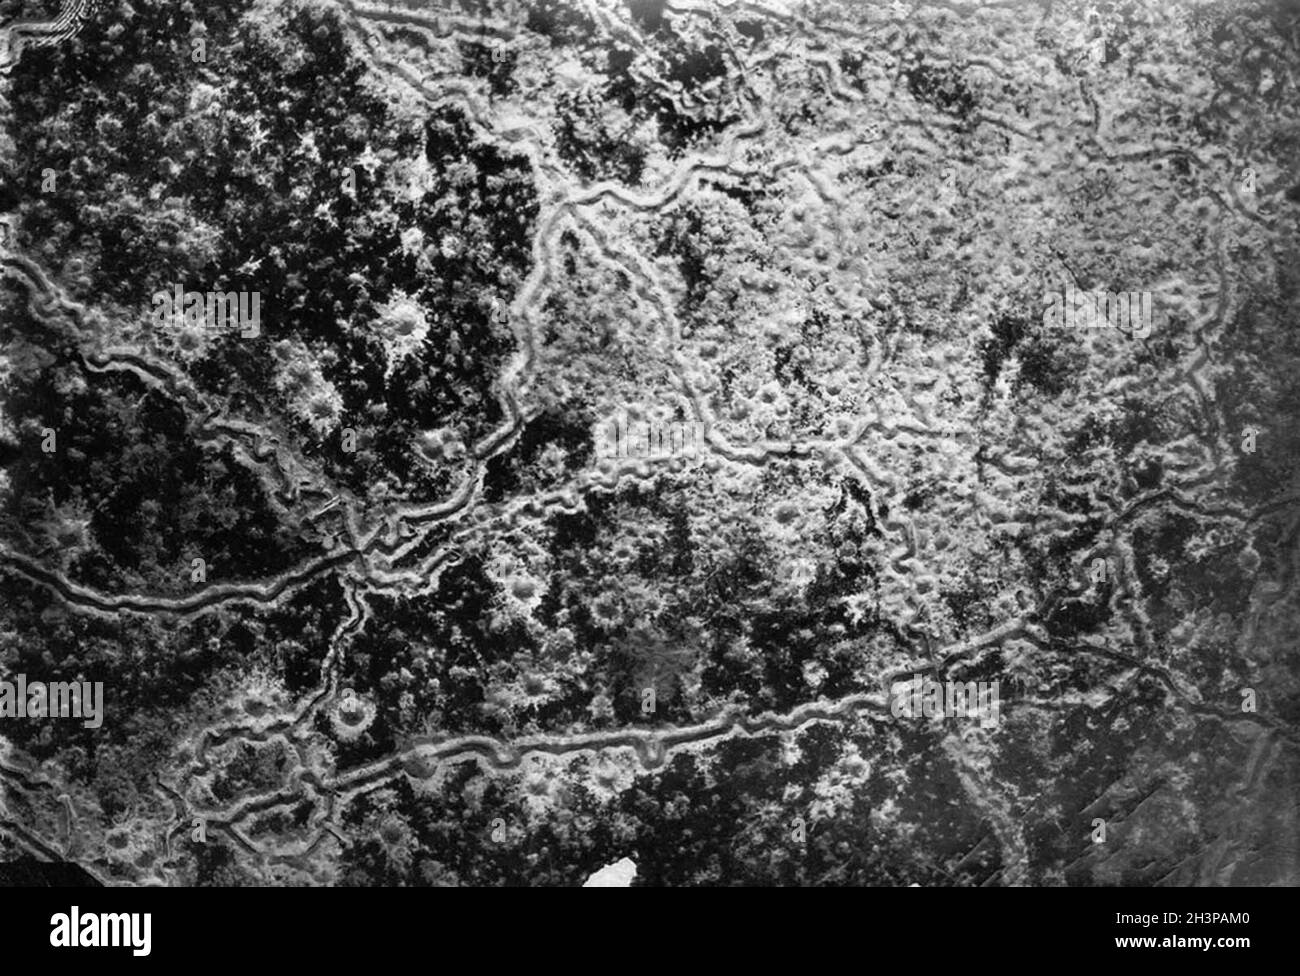 Aerial reconnaissance photograph showing trench lines and artillery craters. Stock Photo